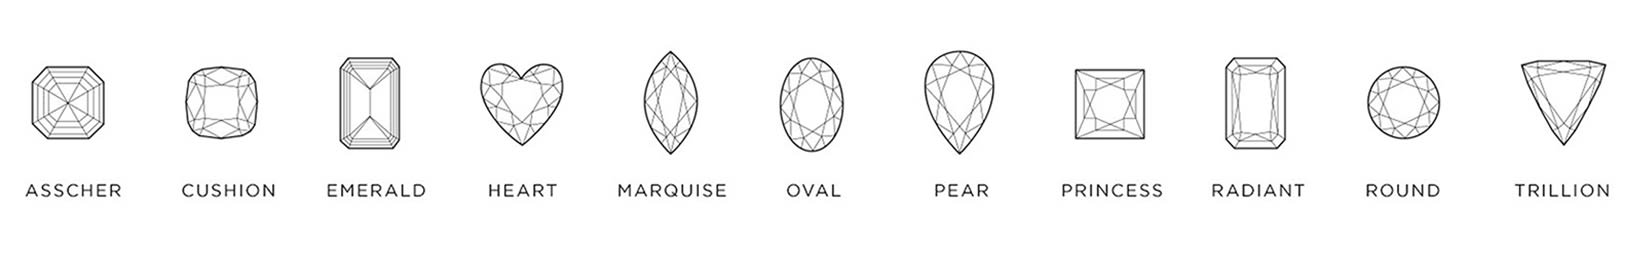 The different diamond shapes